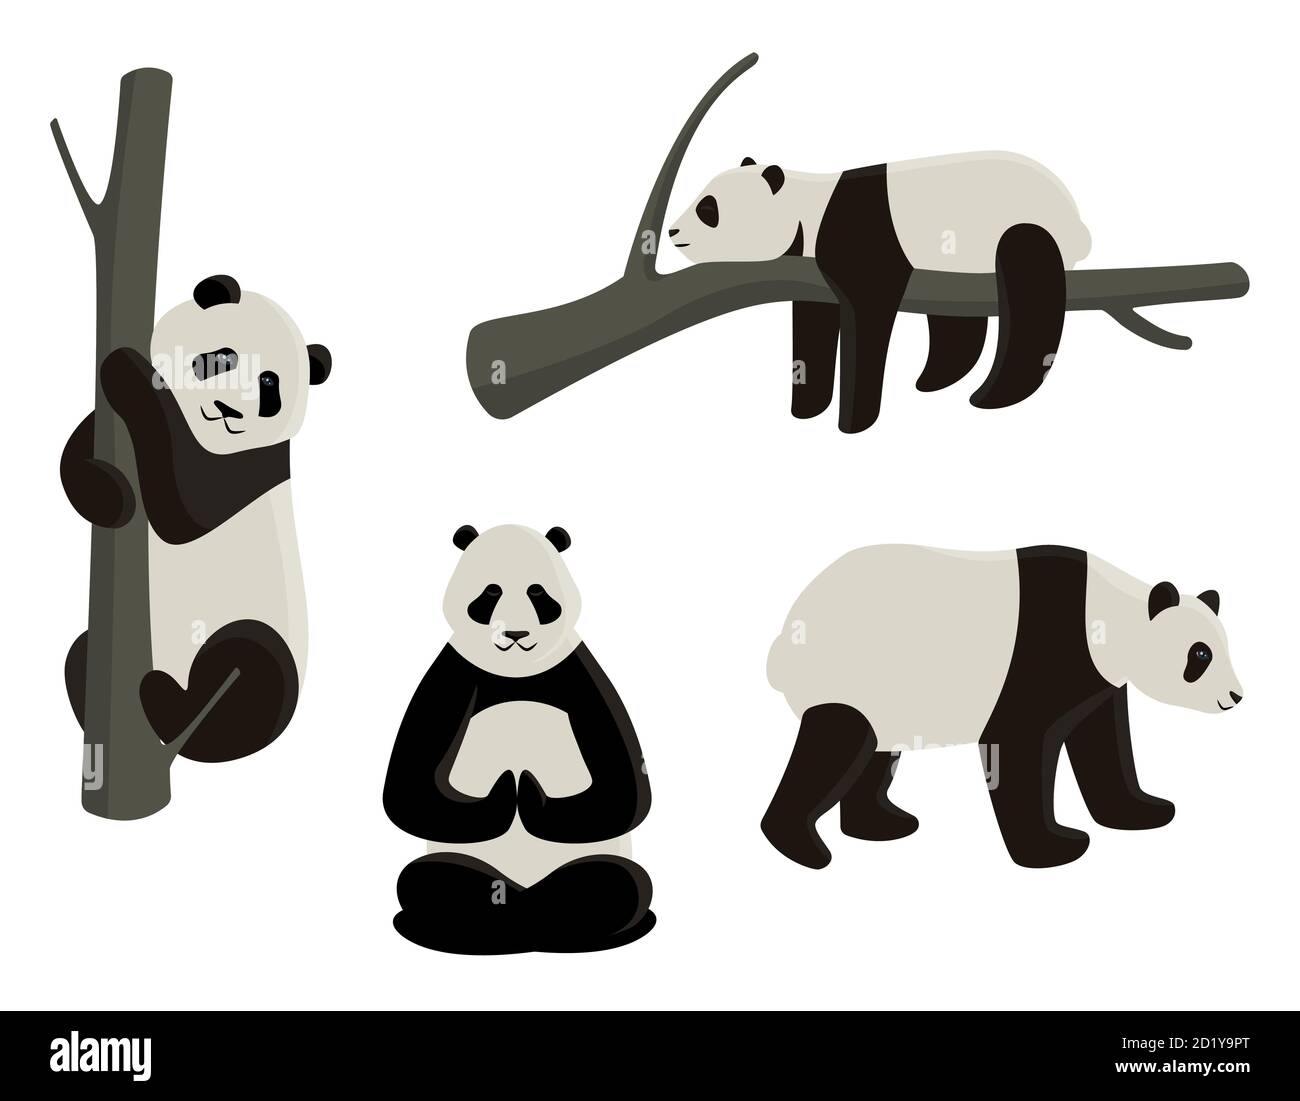 Vector set of pandas in different poses. Cartoon style illustrations isolated on white background. Stock Vector